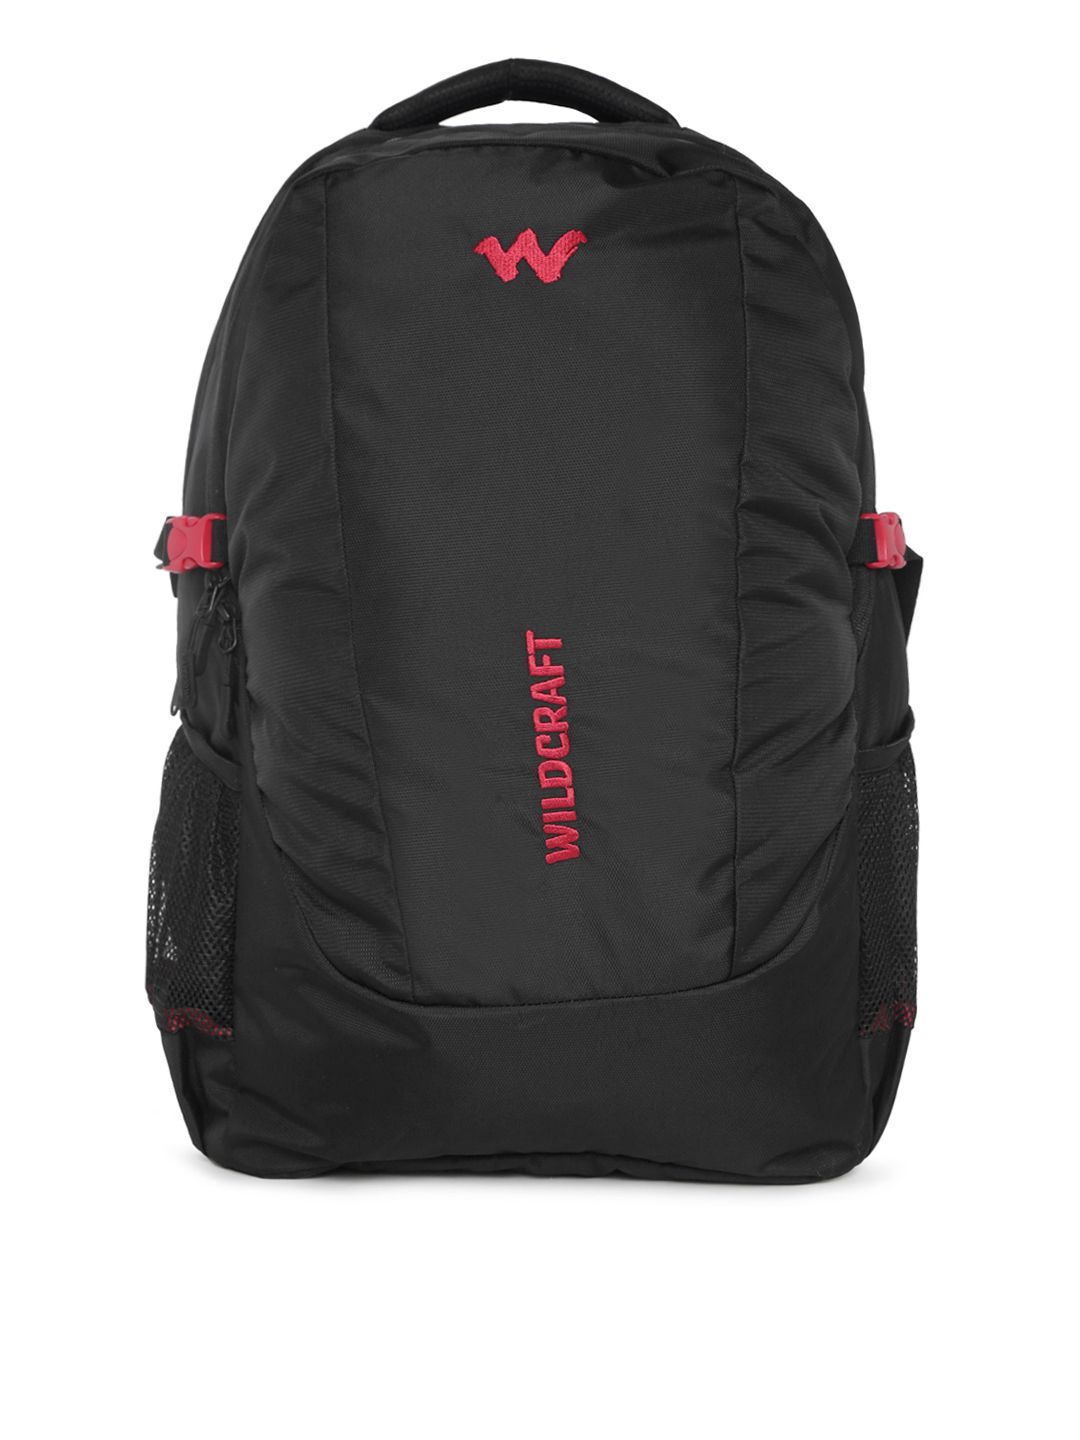 Wildcraft Unisex Black Solid Trident XL 2 Laptop Backpack Price in India